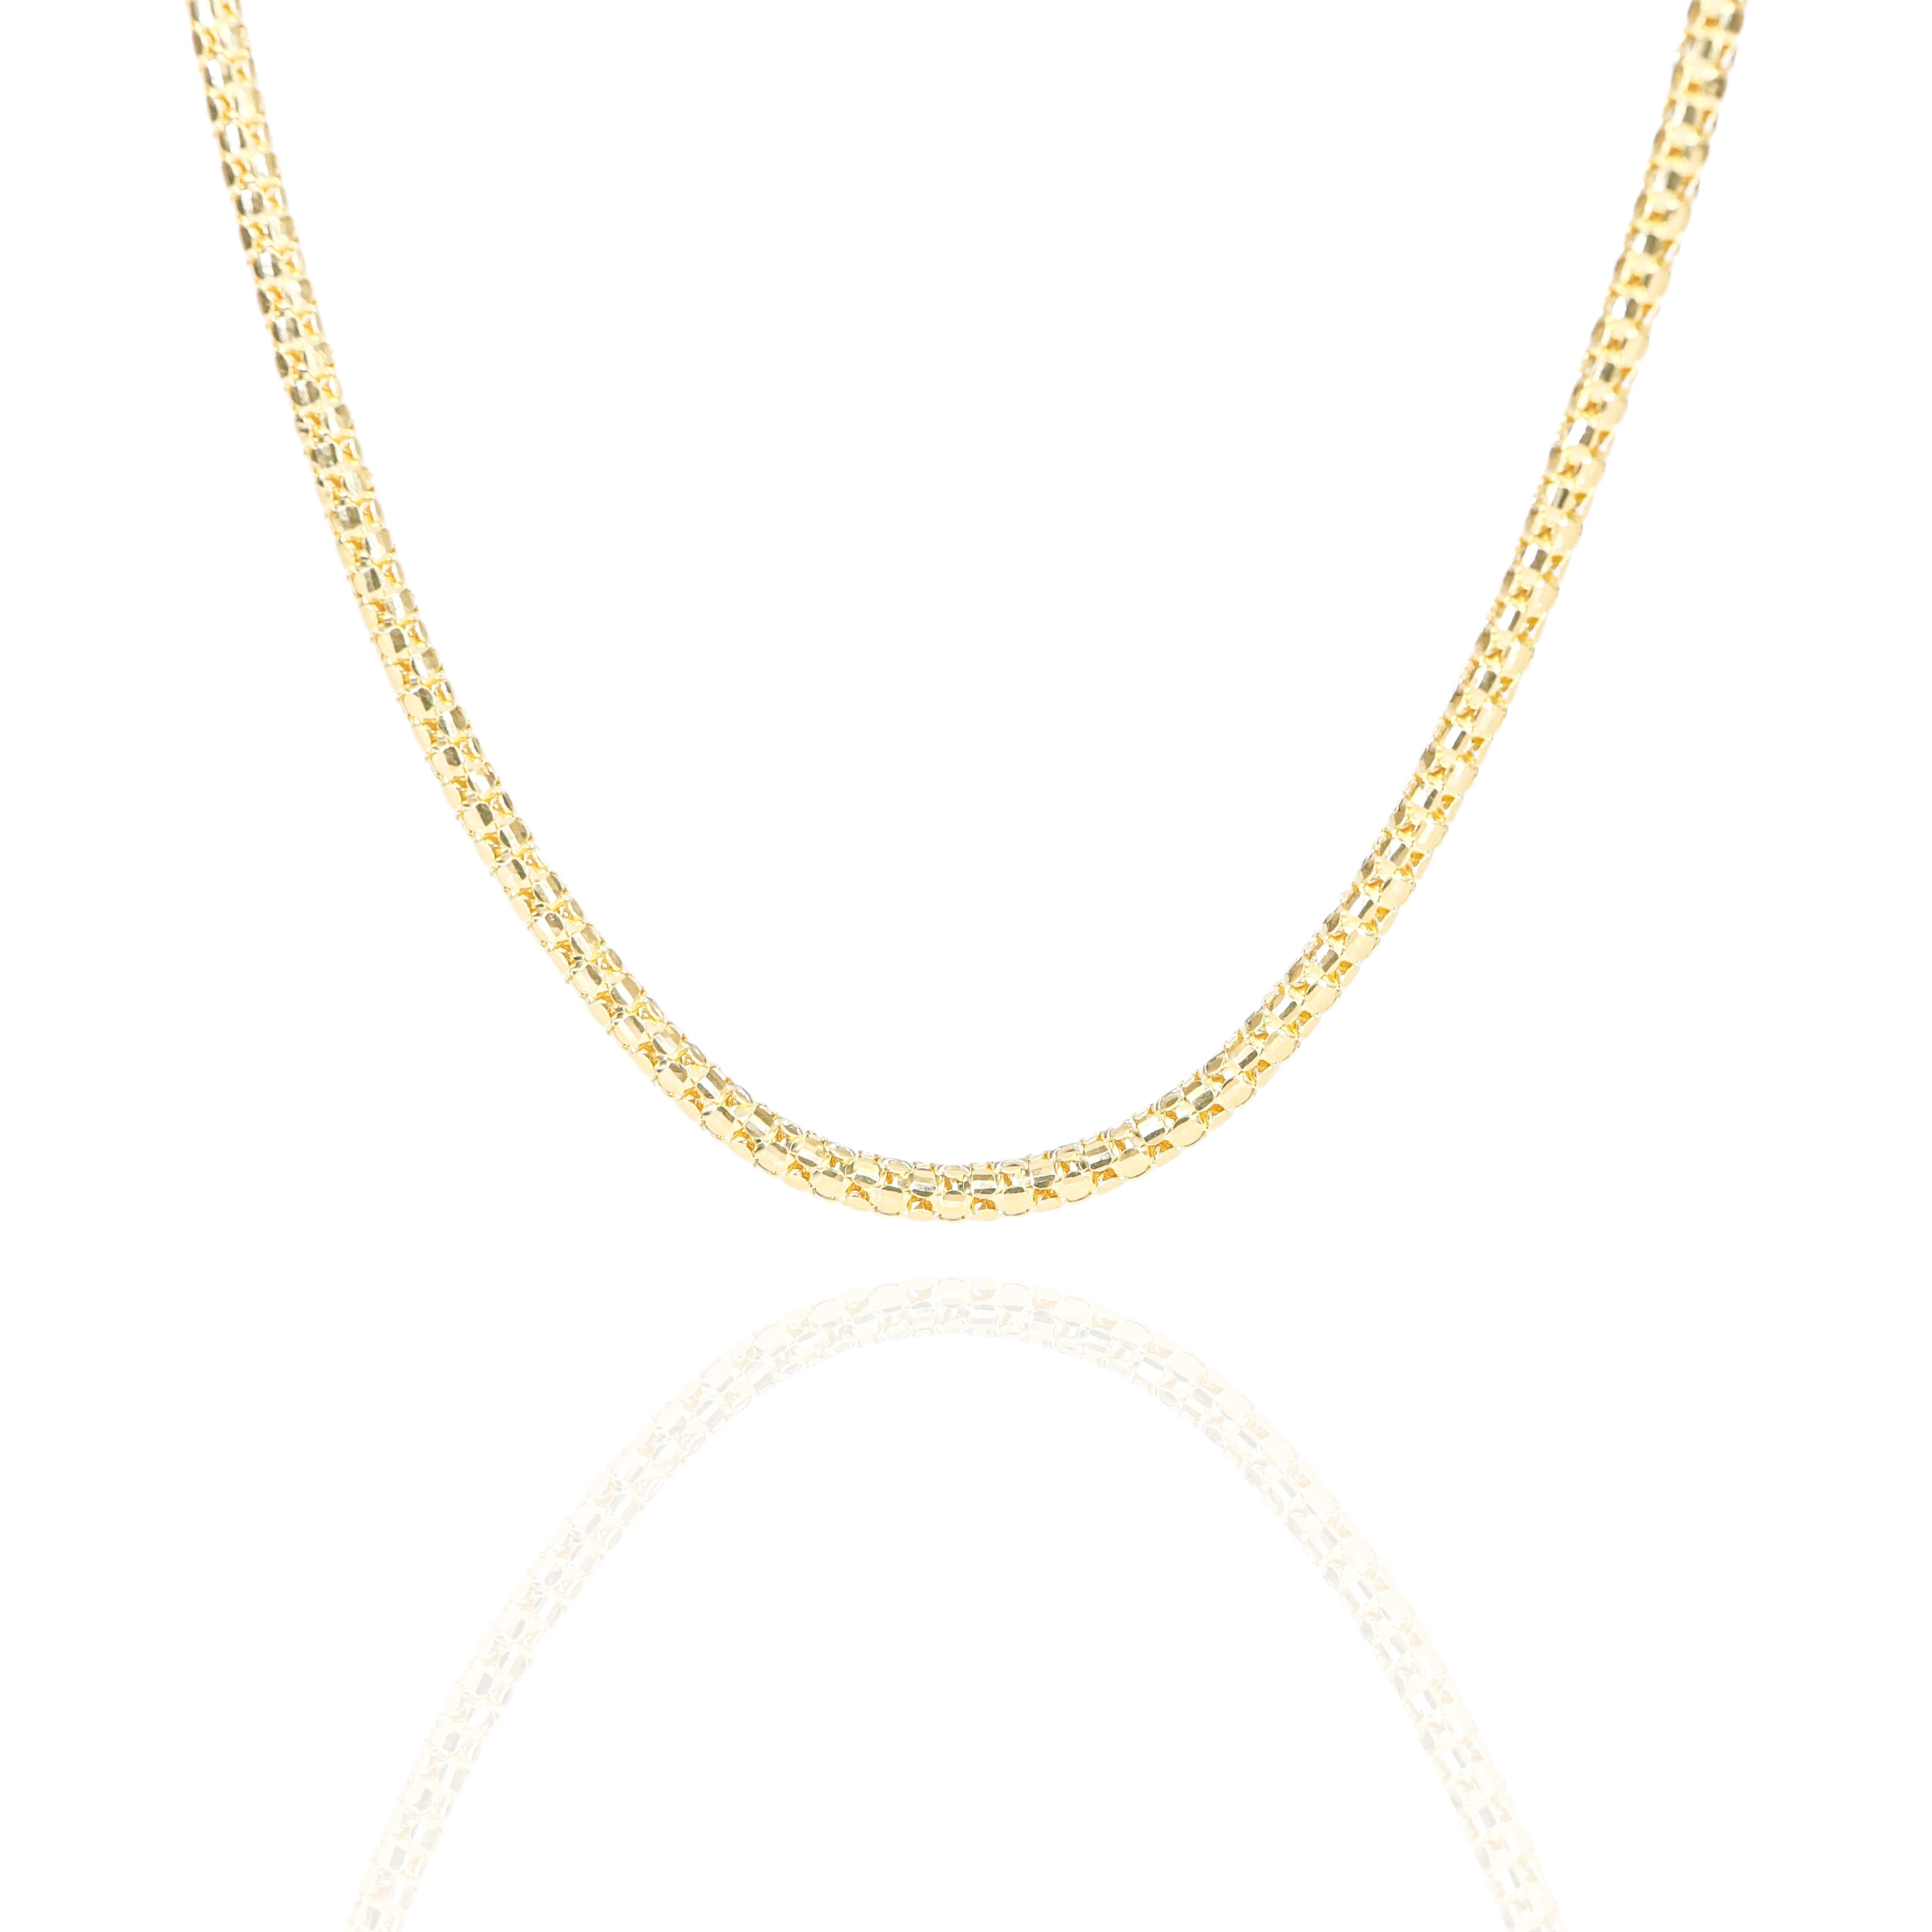 10KT Gold Solid Popcorn Chain